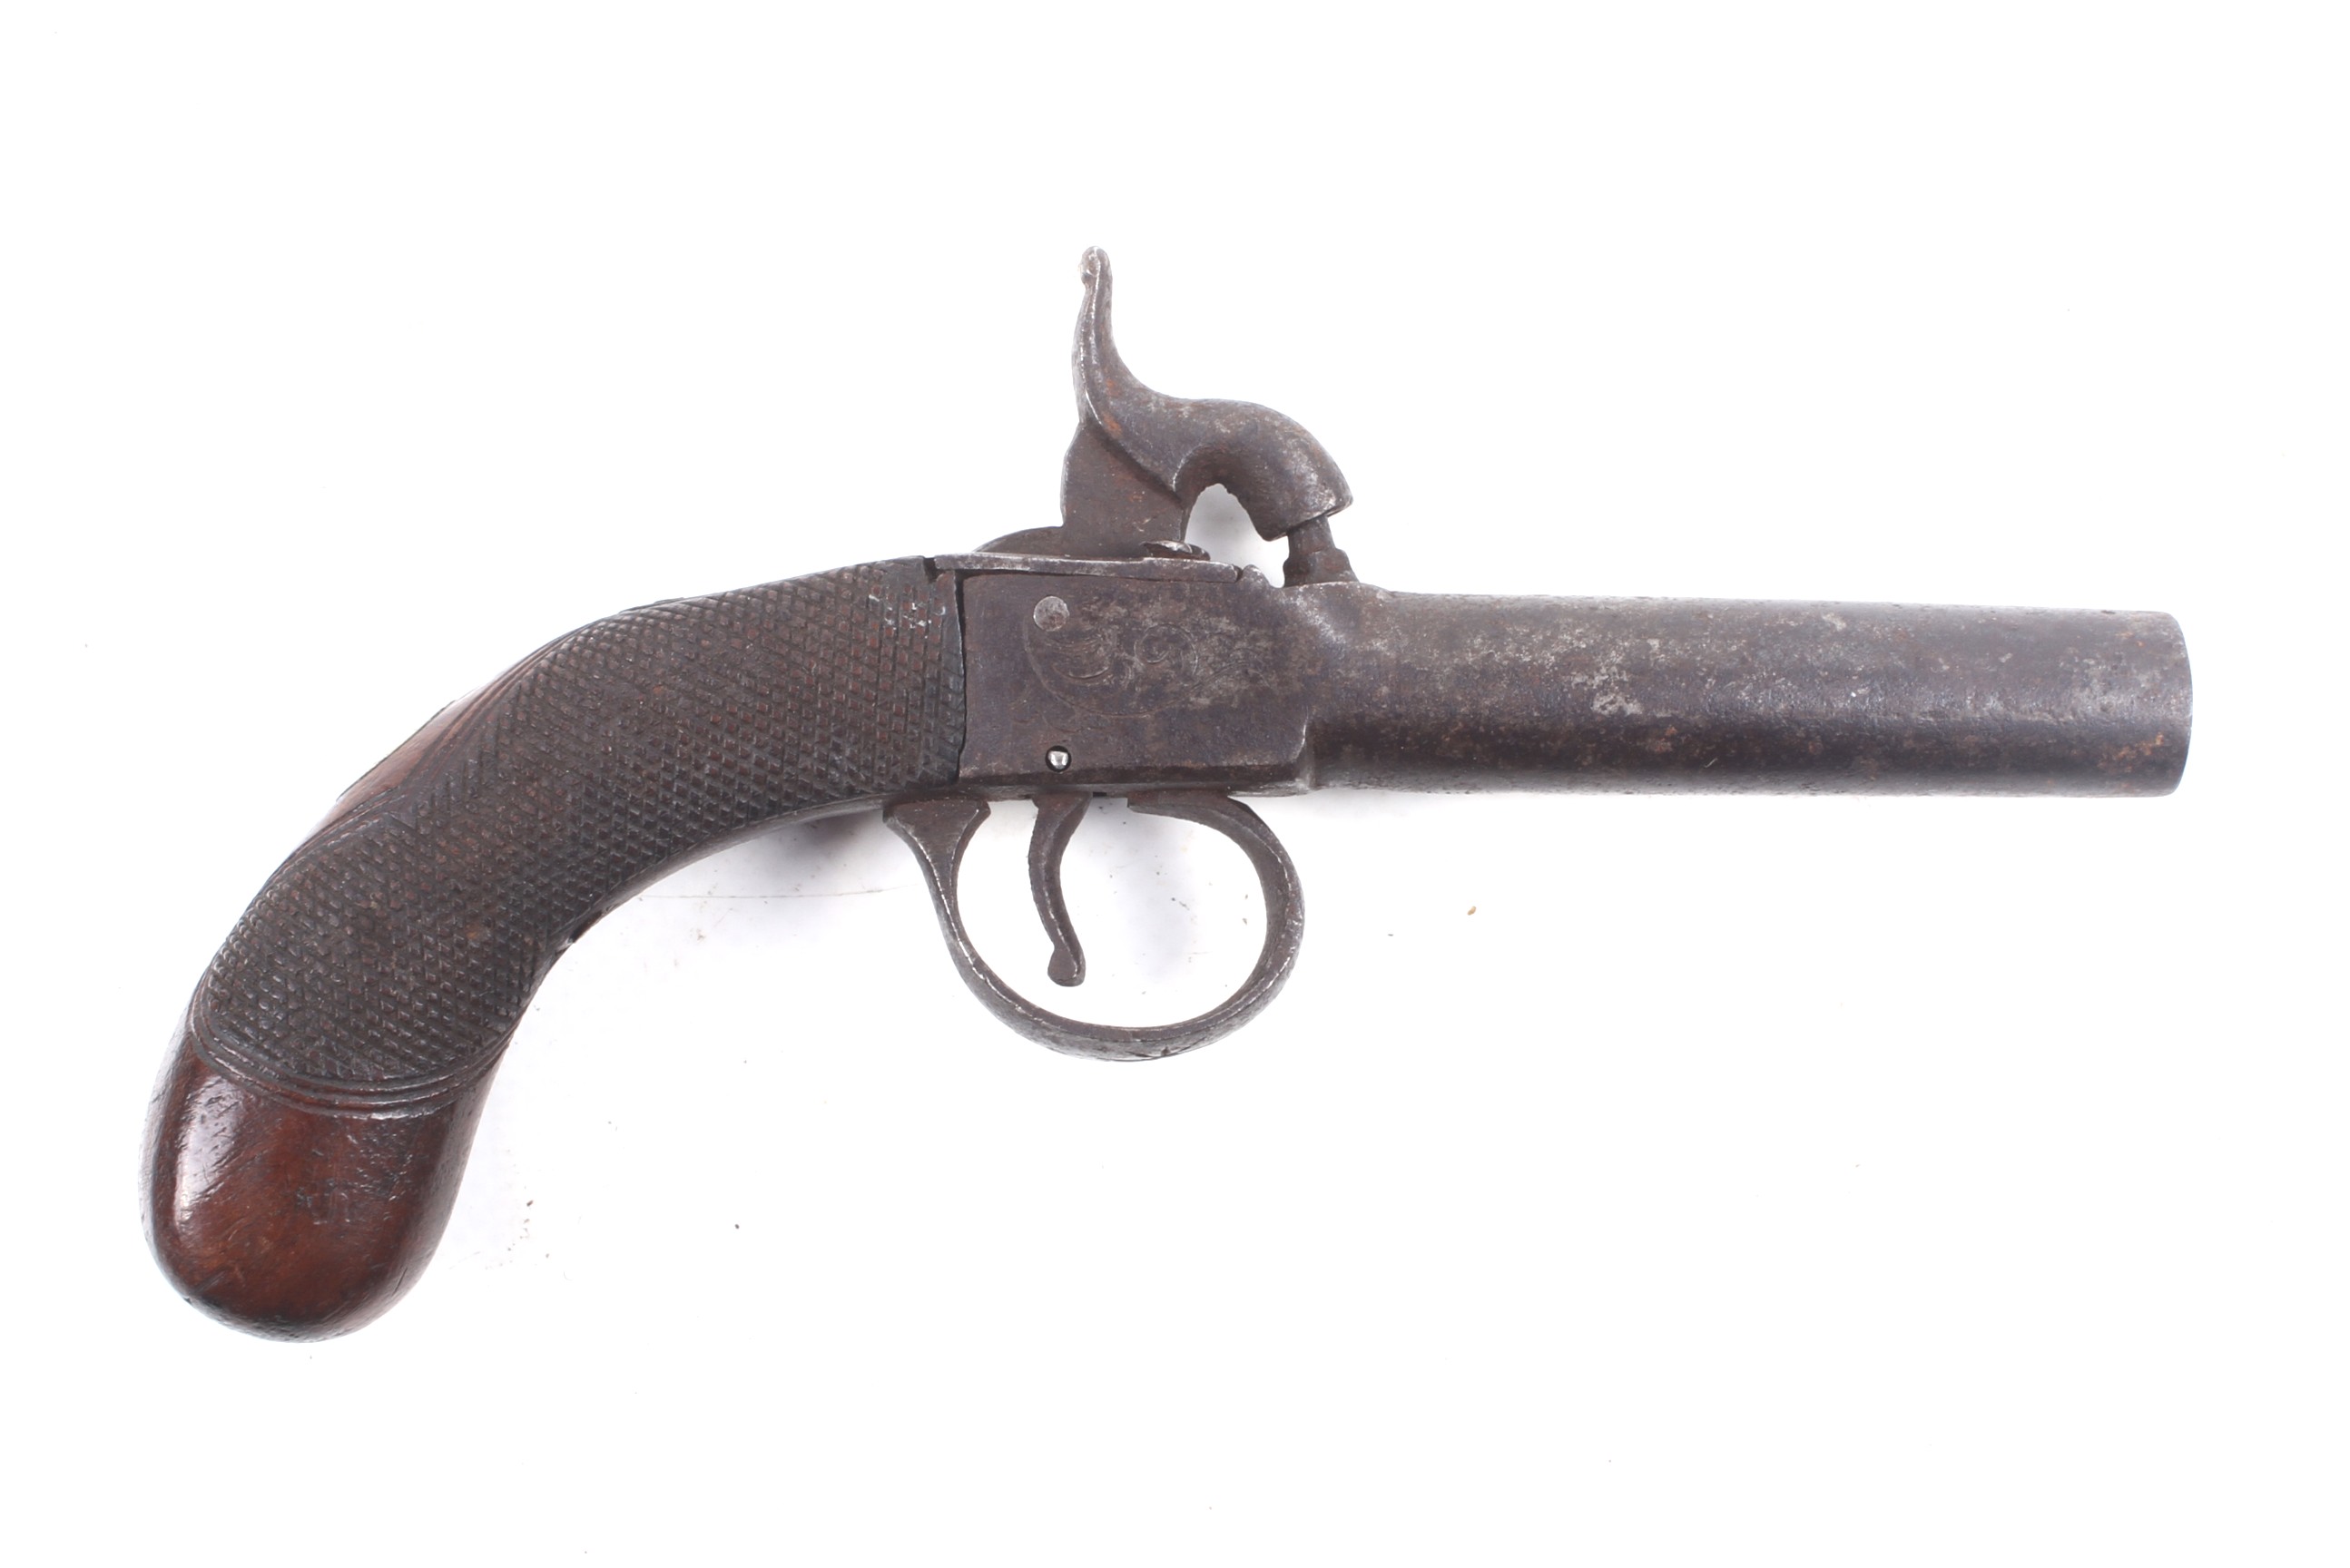 A circa 1860 percussion side hammer pocket pistol. With engraved sideplates and gripped stock.